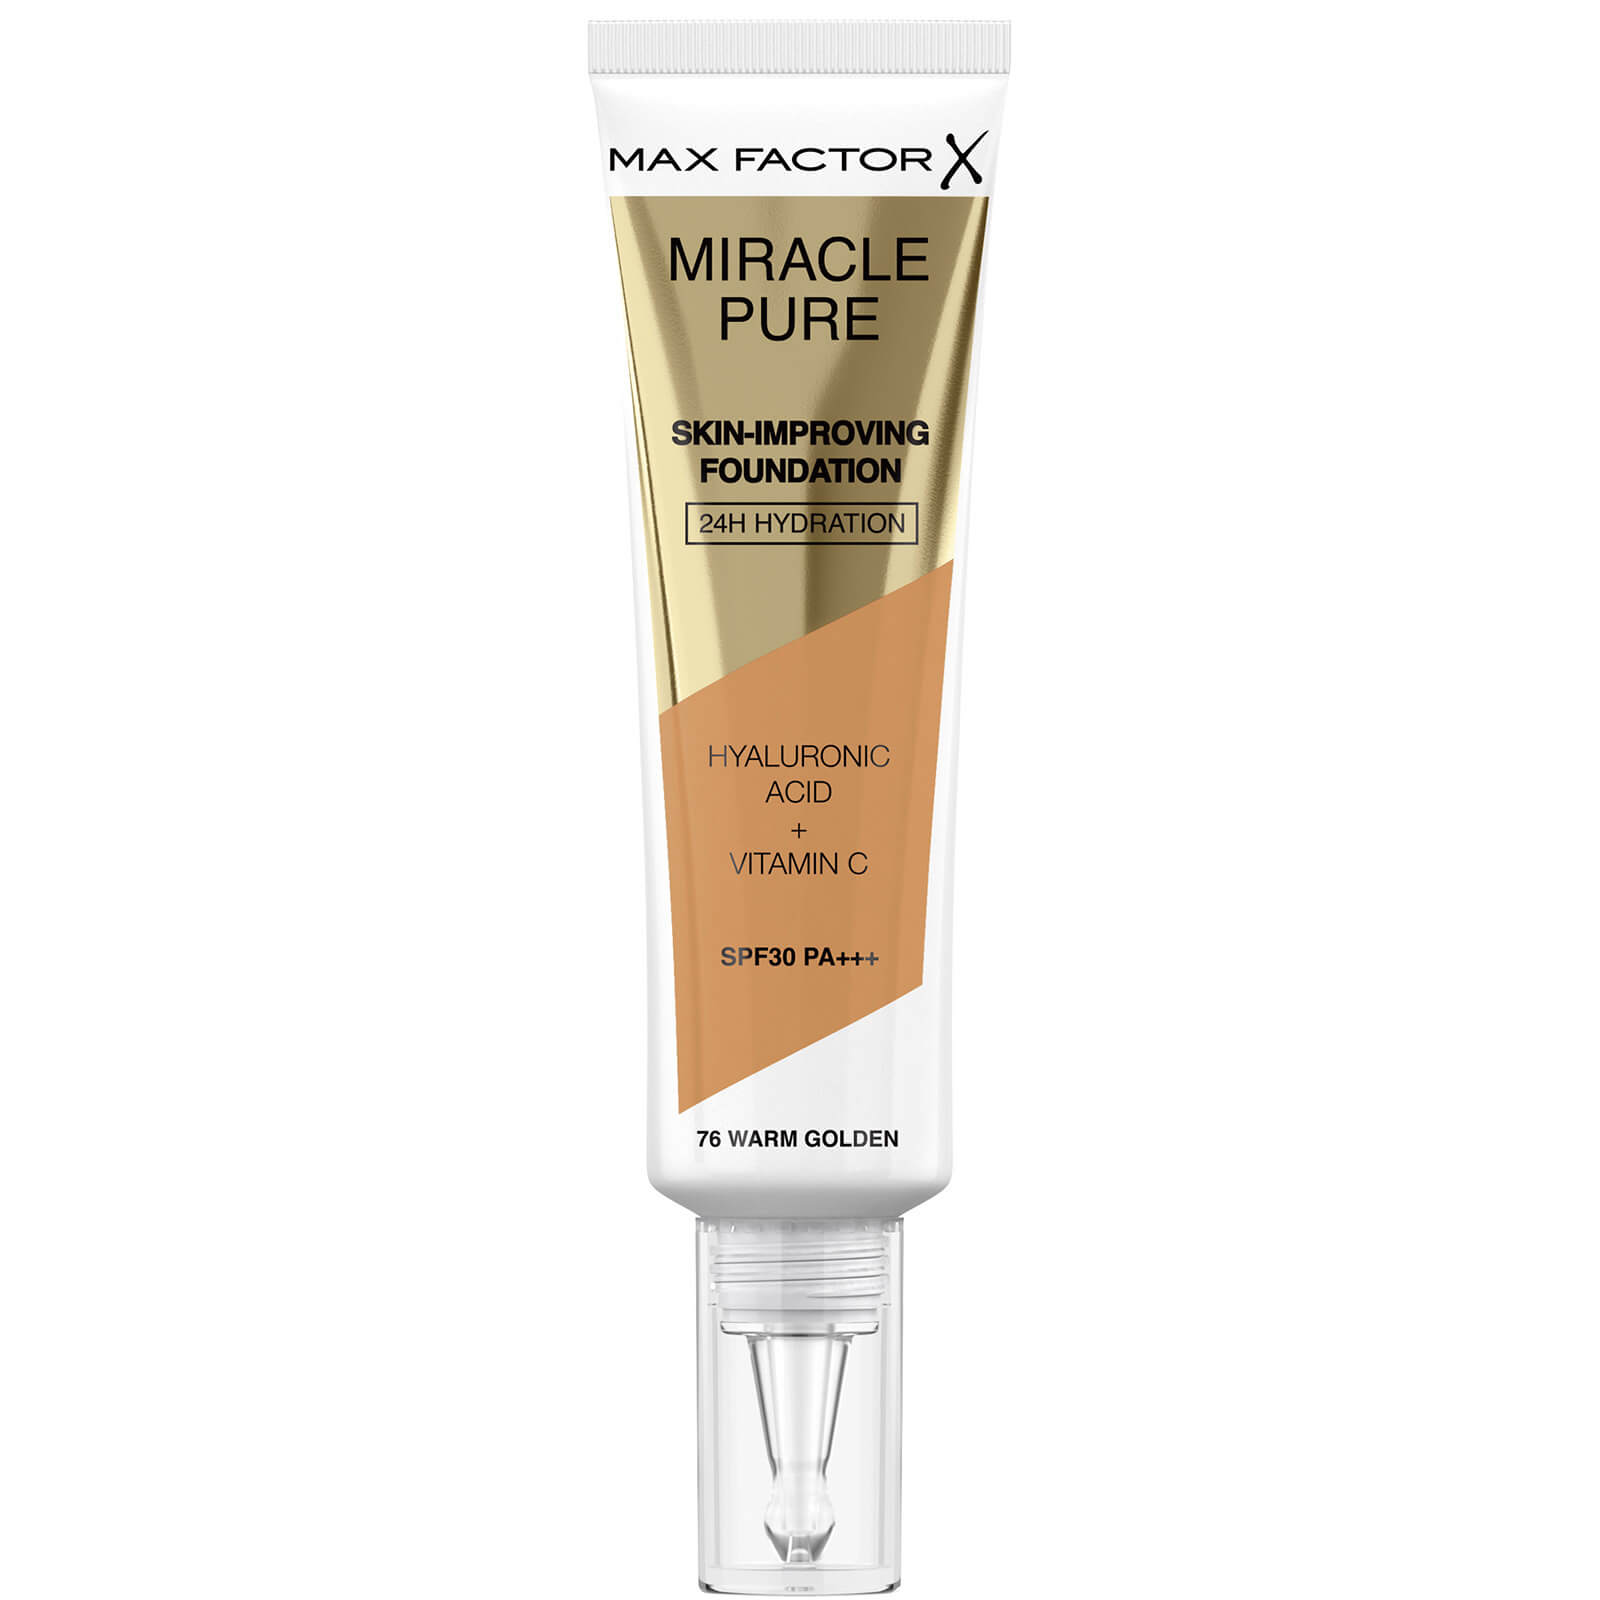 Max Factor Miracle Pure Skin Improving Foundation 30ml (Various Shades) - Warm Golden